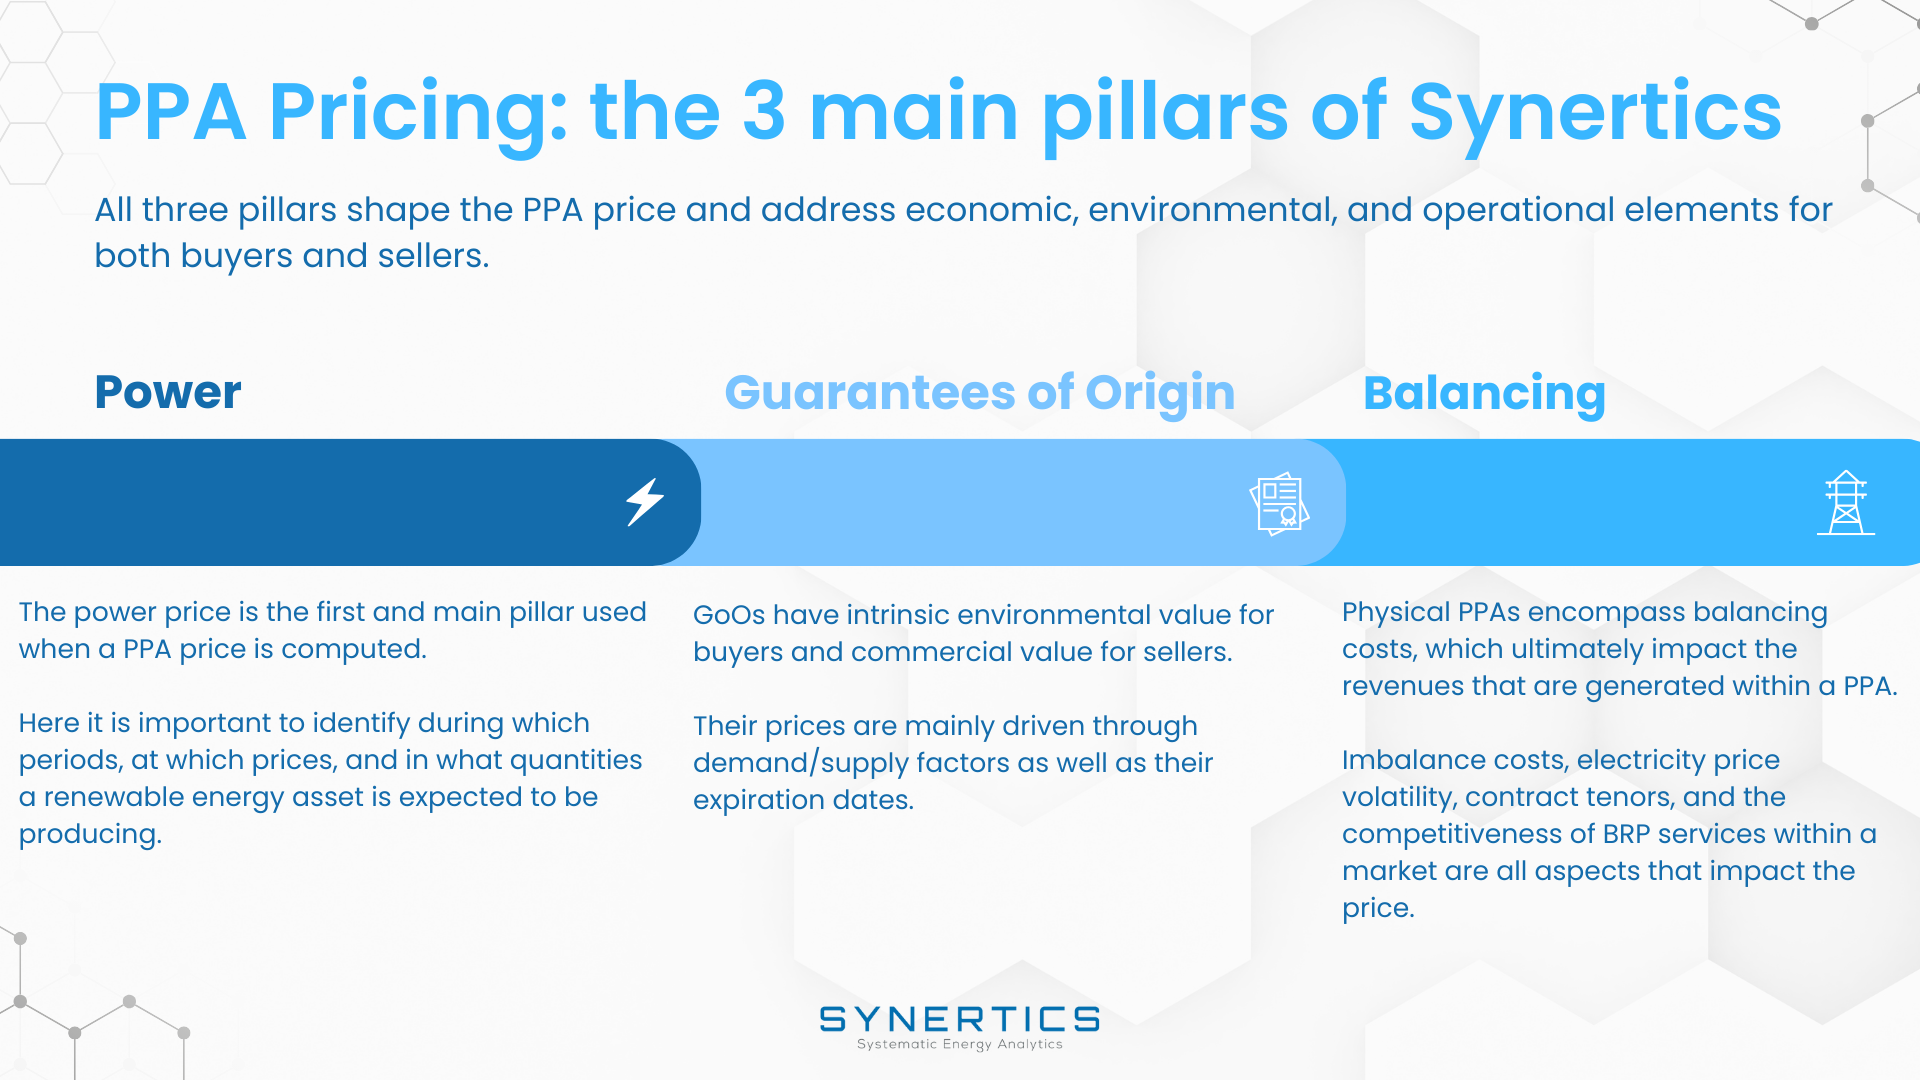 PPA pricing in 3 main pillars by Synertics